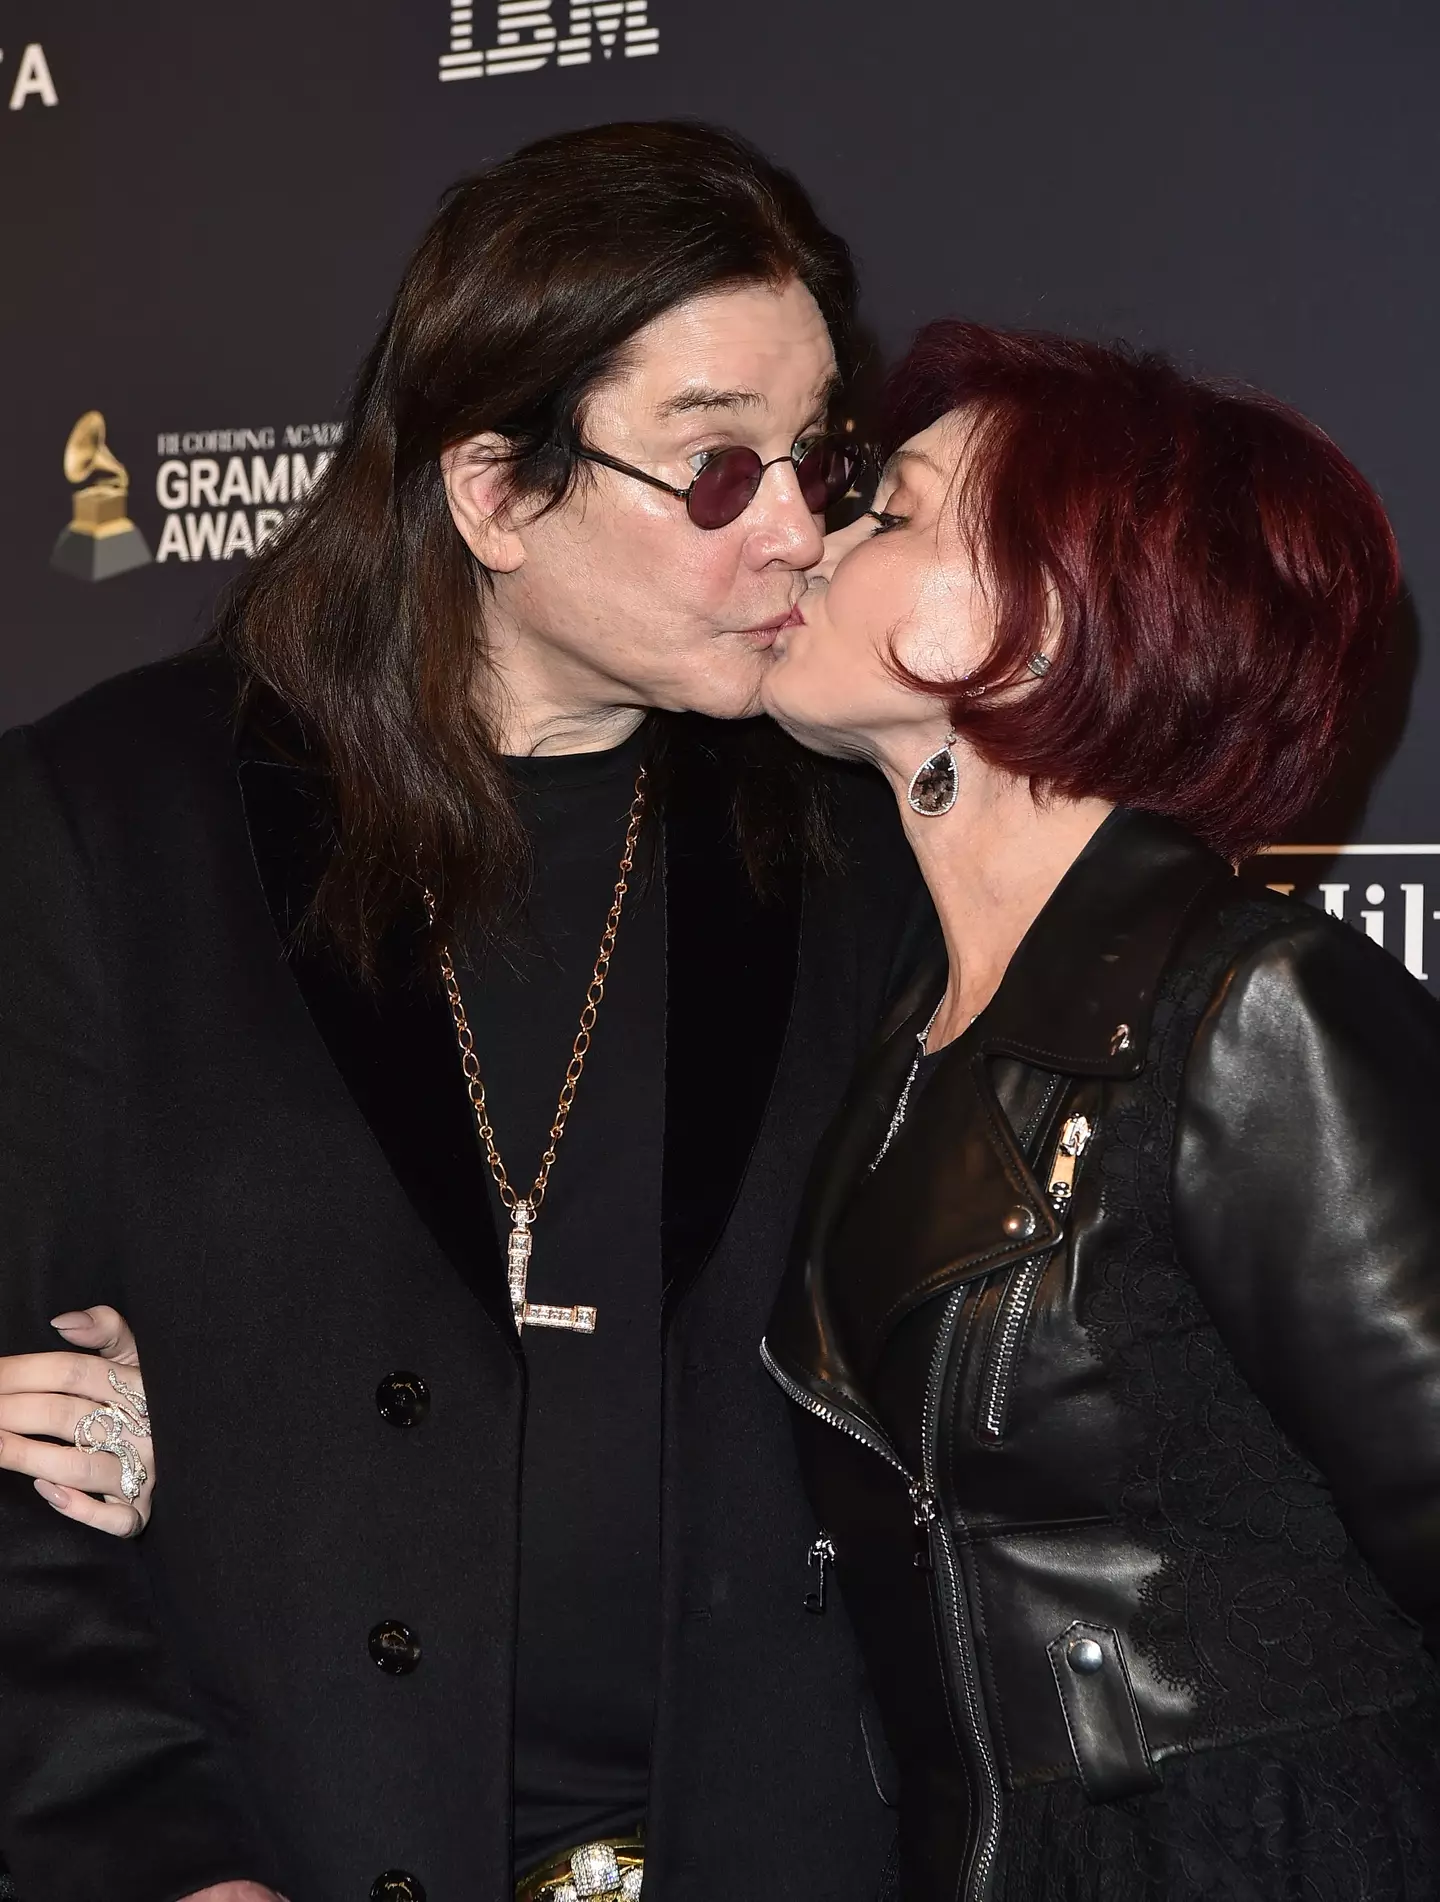 Sharon has been married to Ozzy Osbourne for 42 years.